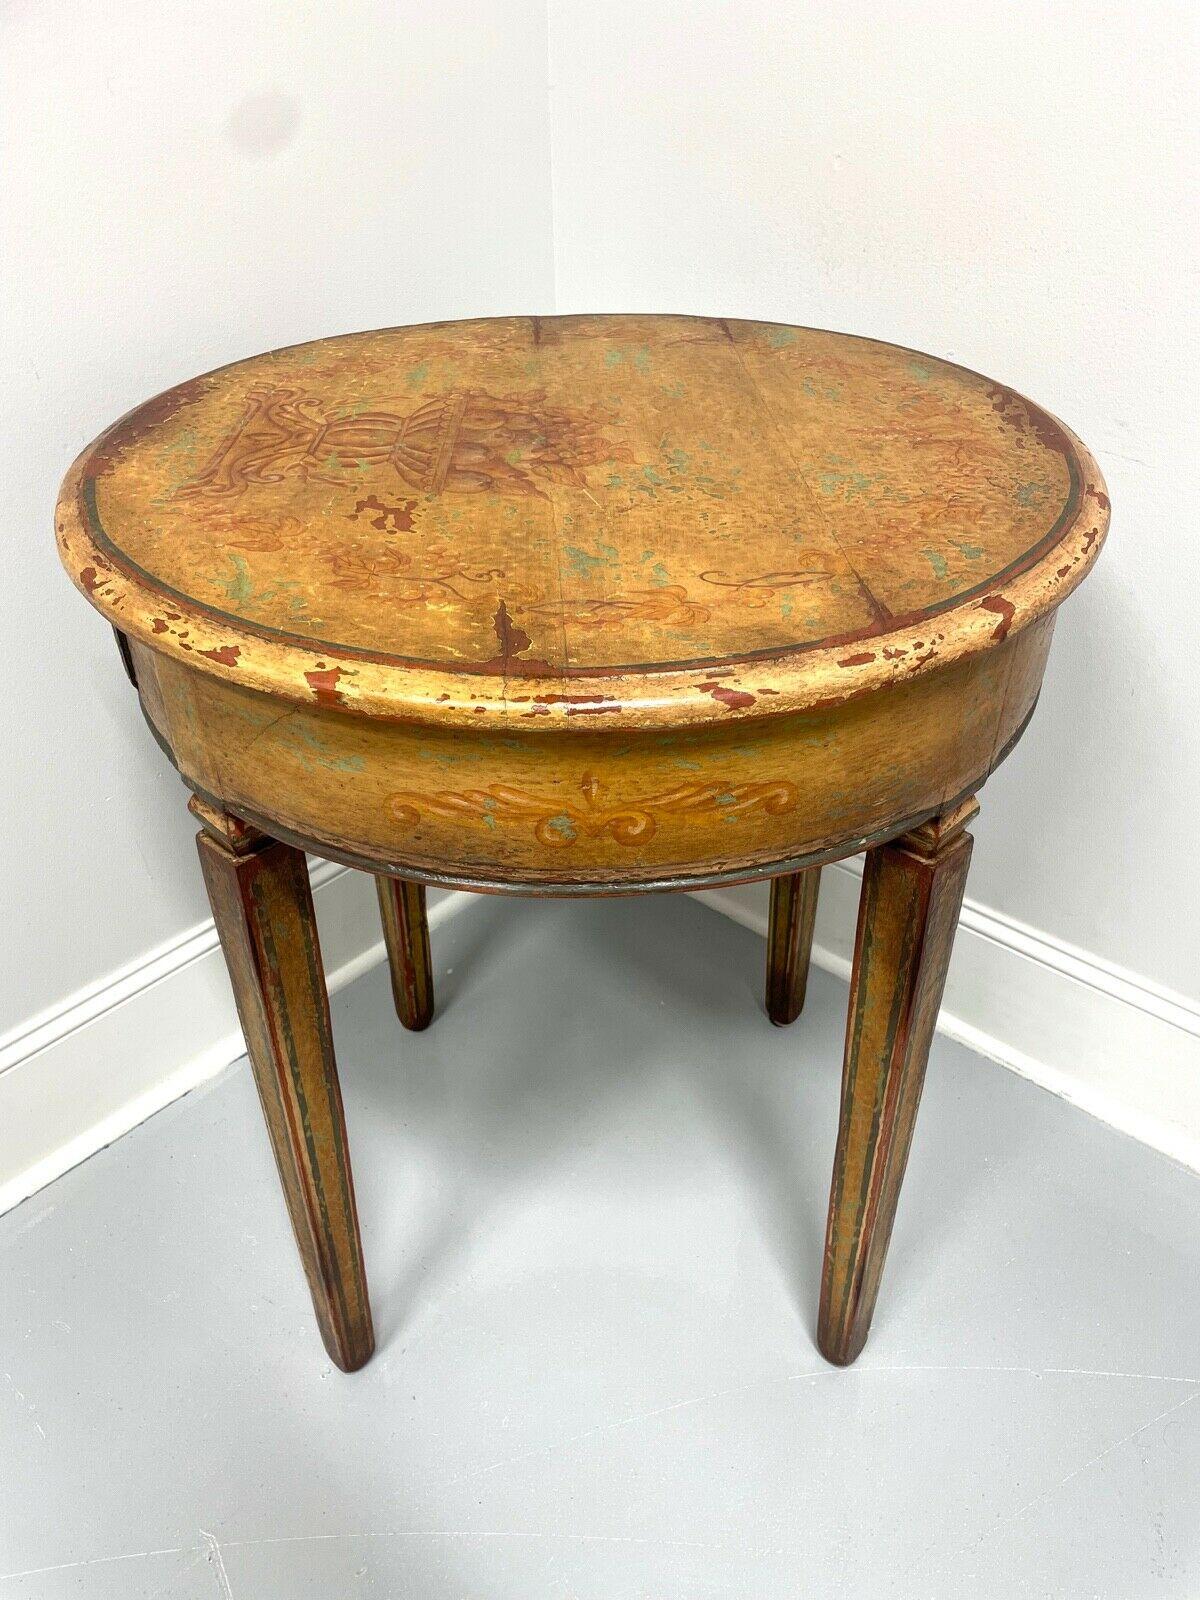 Other Antique 18th Century Hand Painted Round Accent Table For Sale